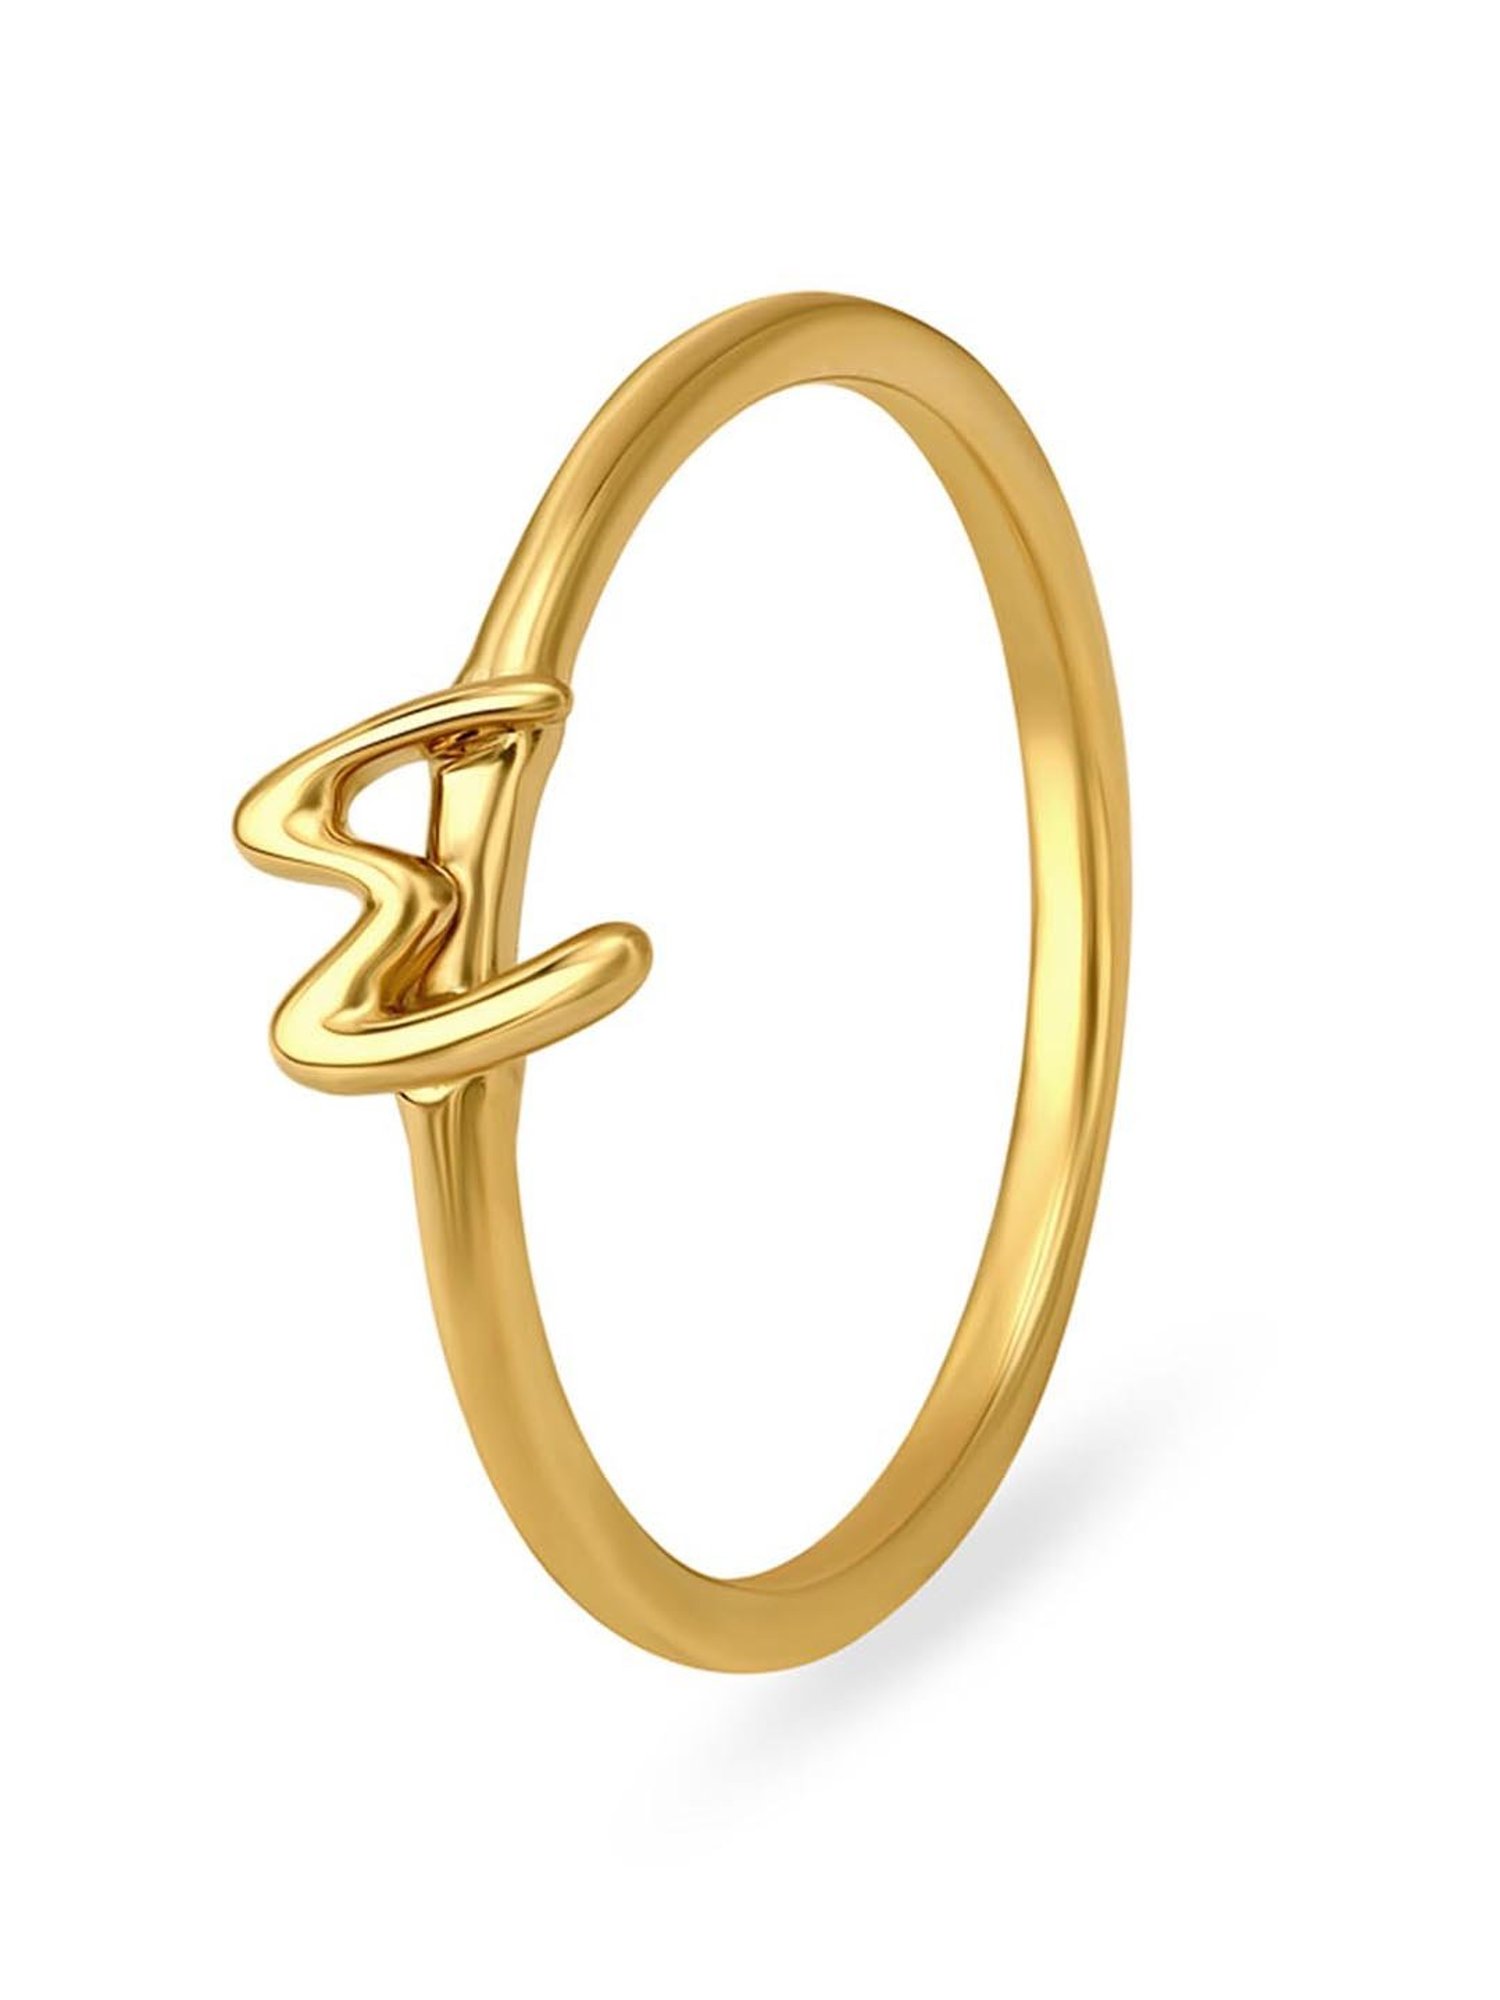 Buy Gold Letter C Ring Online In India - Etsy India